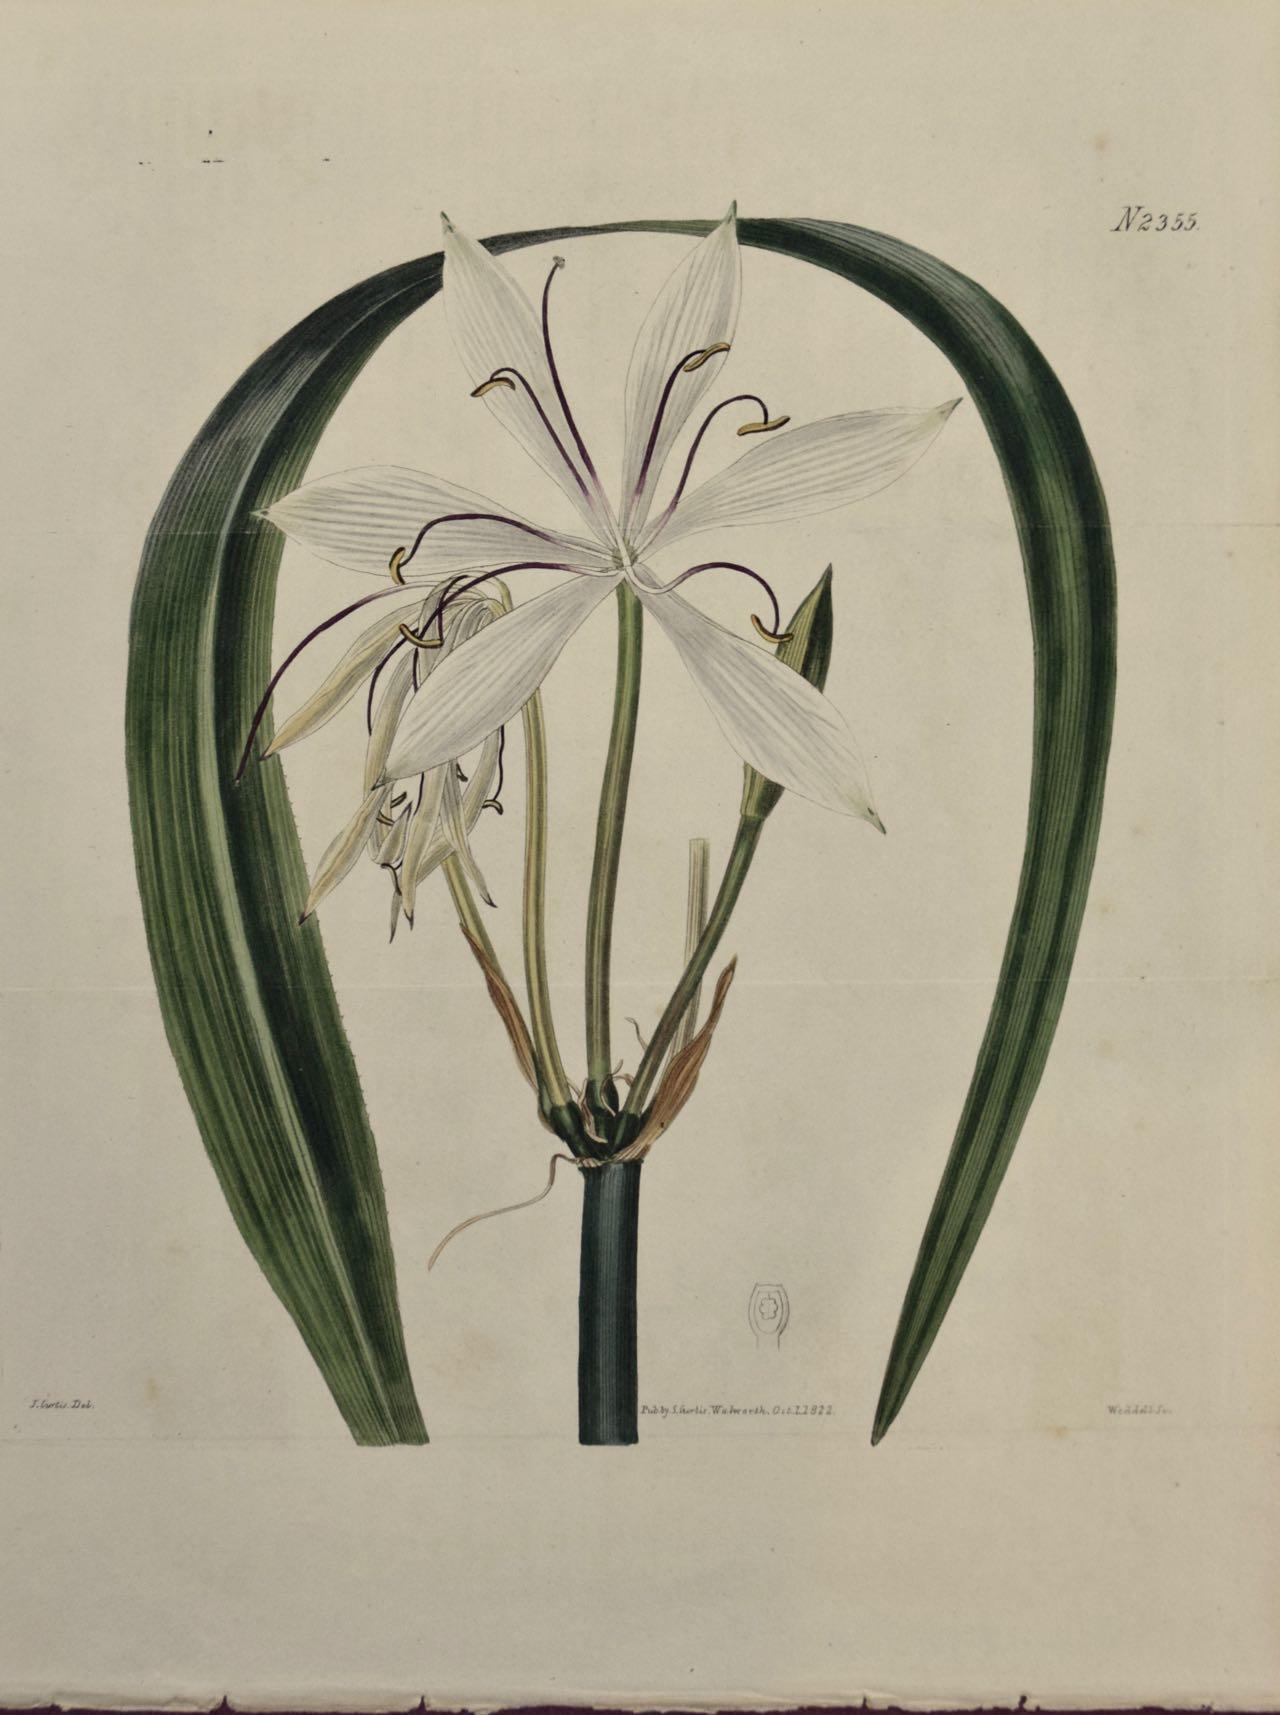 William Curtis Still-Life Print - Flowering Crinum Plant: A 19th C. Hand-colored Botanical Engraving by Curtis